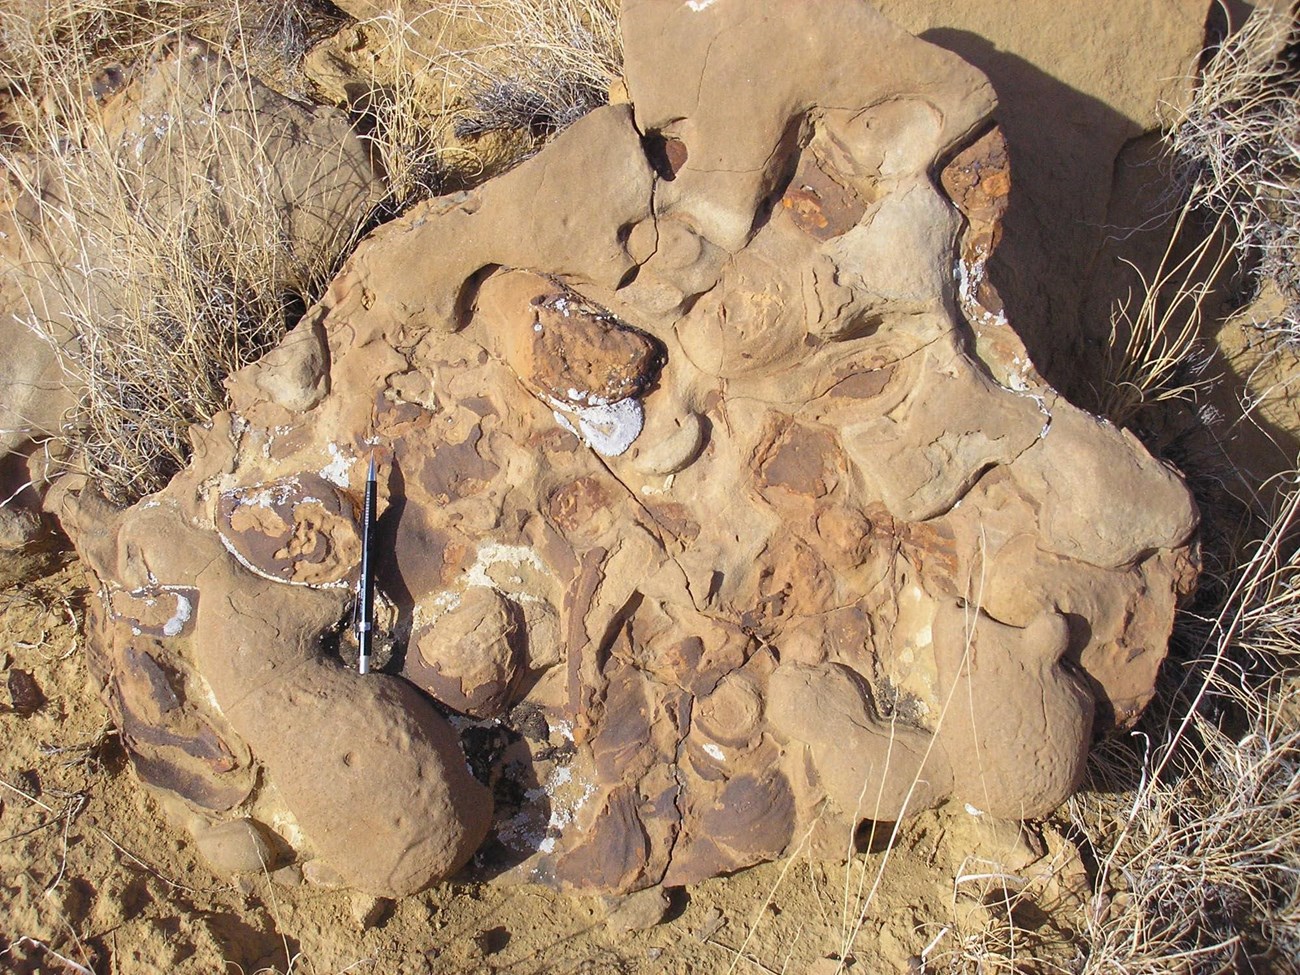 fossil clam bed in sandstone